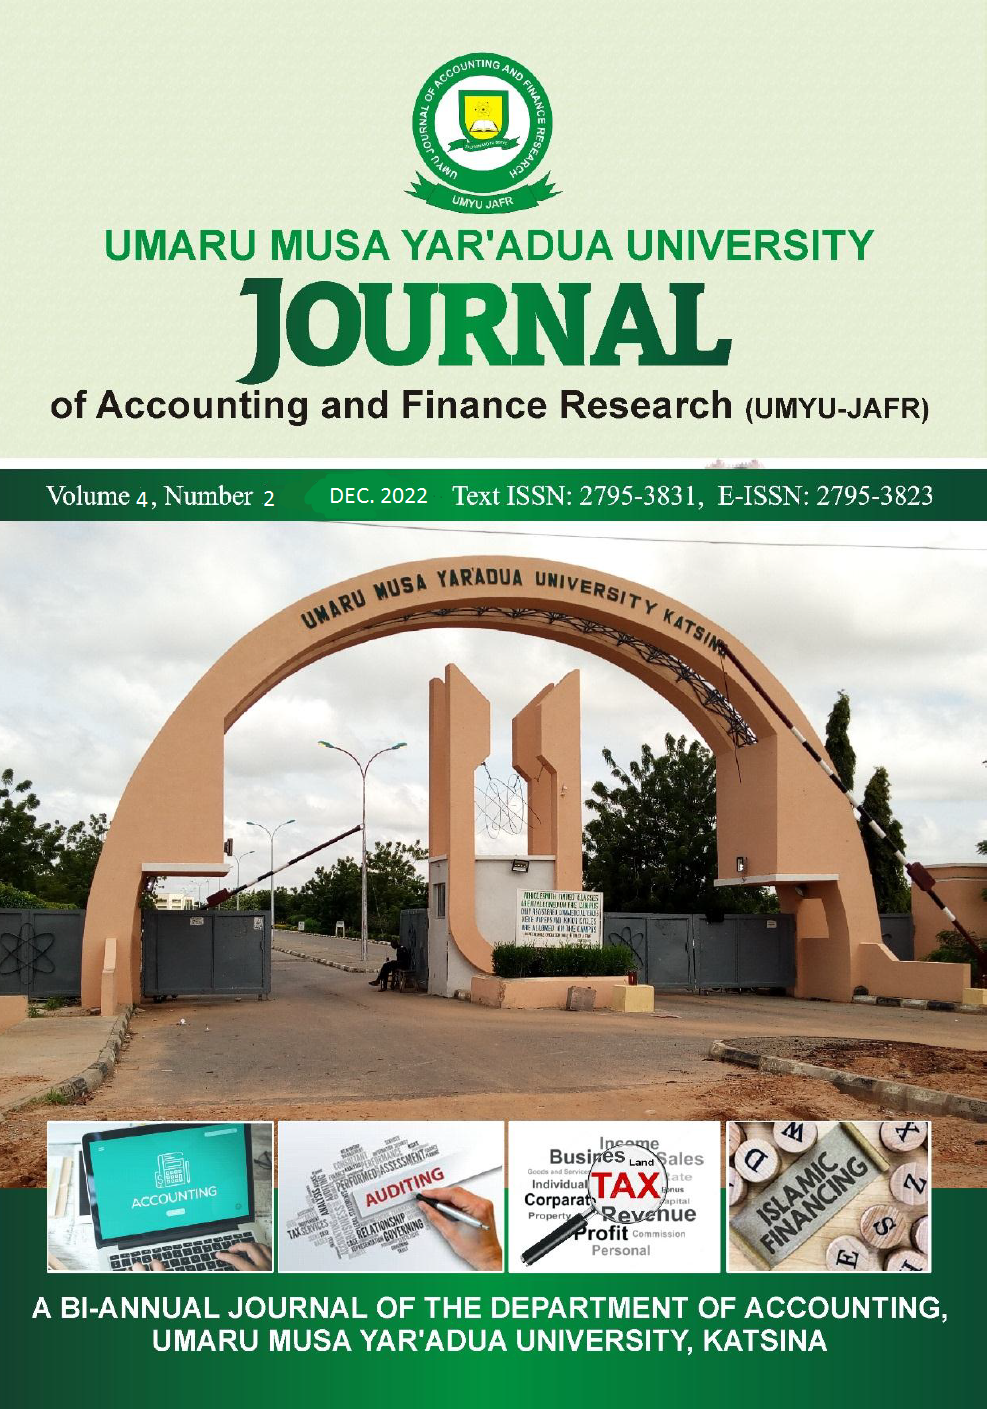 					View Vol. 4 No. 2 (2022): UMYU Journal of Accounting and Finance Research VOL. 4 NO. 2 Decmber, 2022
				